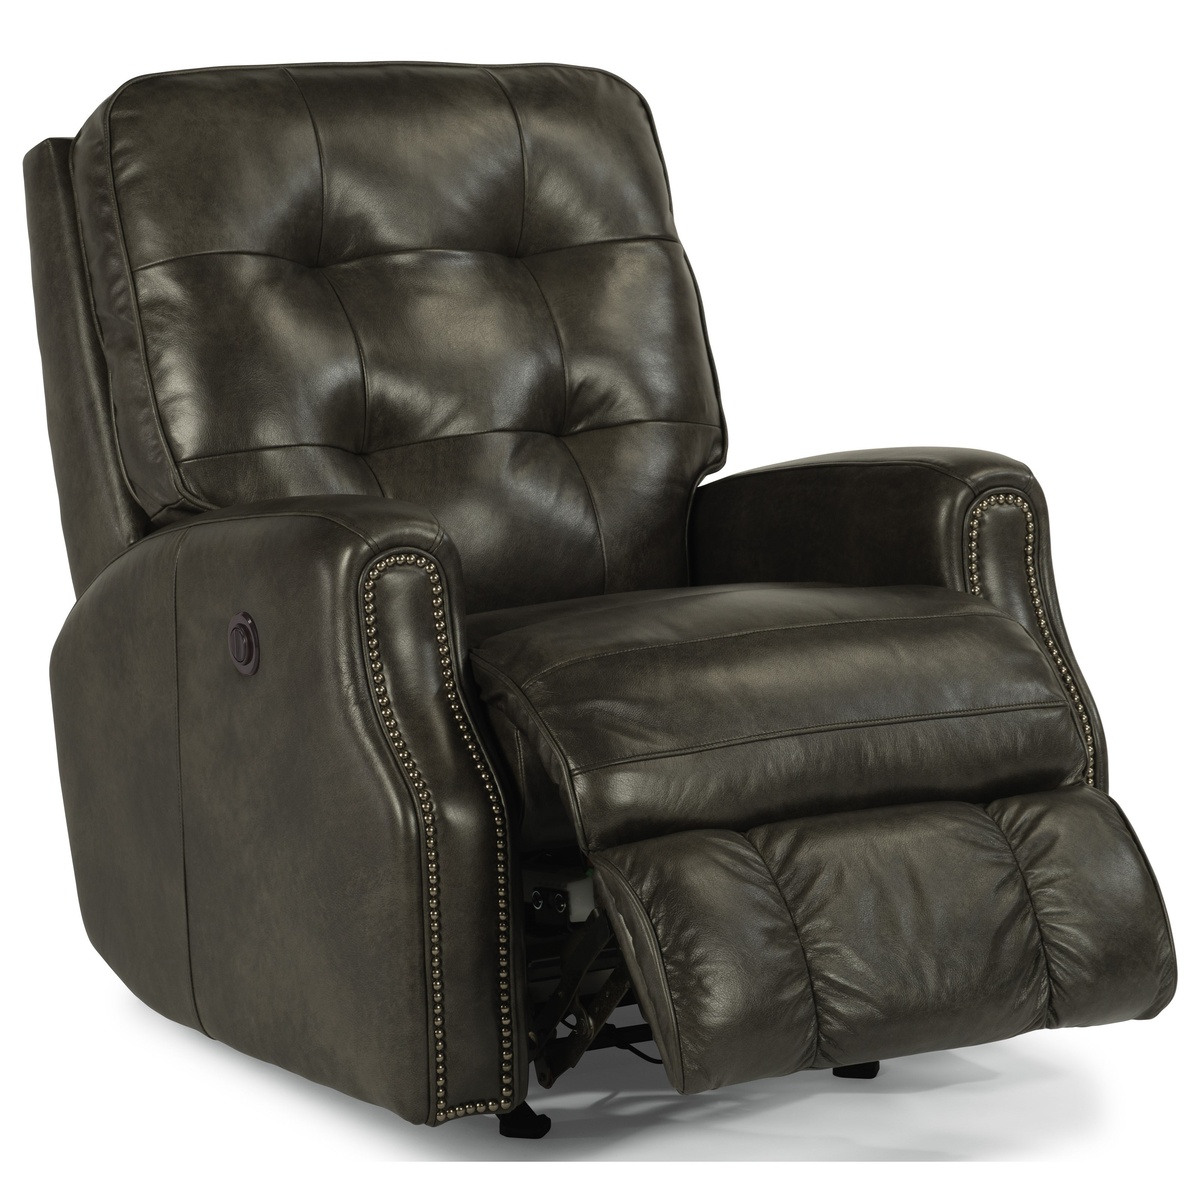 How To Reset Power Recliner?